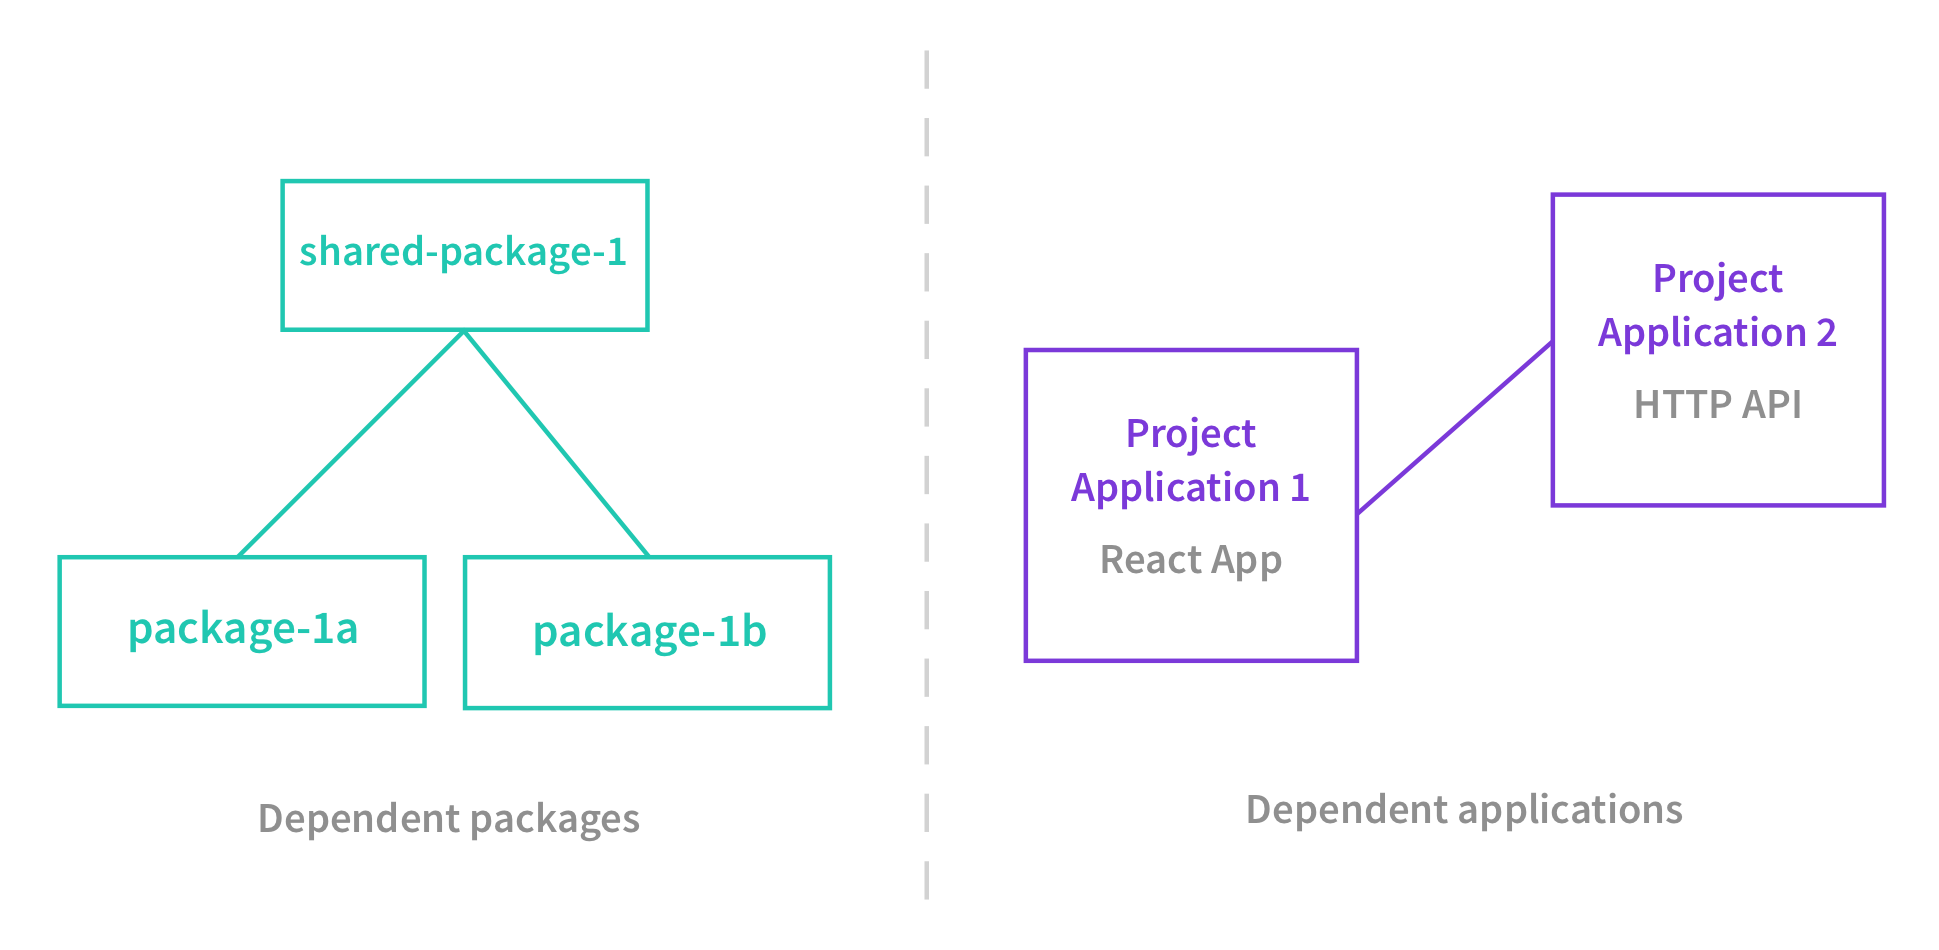 Dependent Packages and Applications